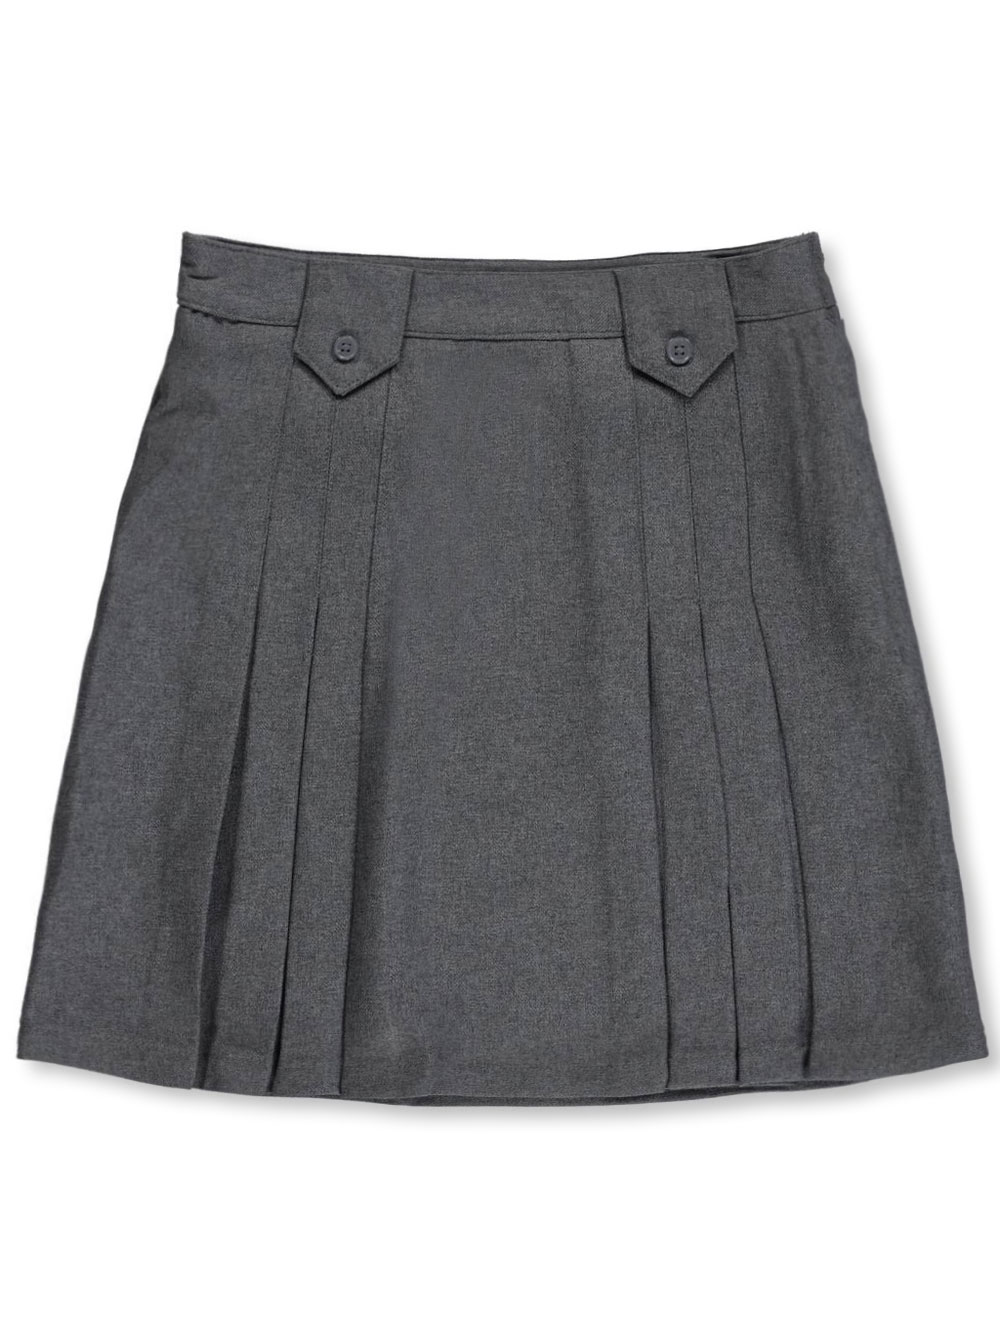 At School by French Toast French Toast Big Girls' Pleat and Tab Skirt (Sizes 7 - 20)